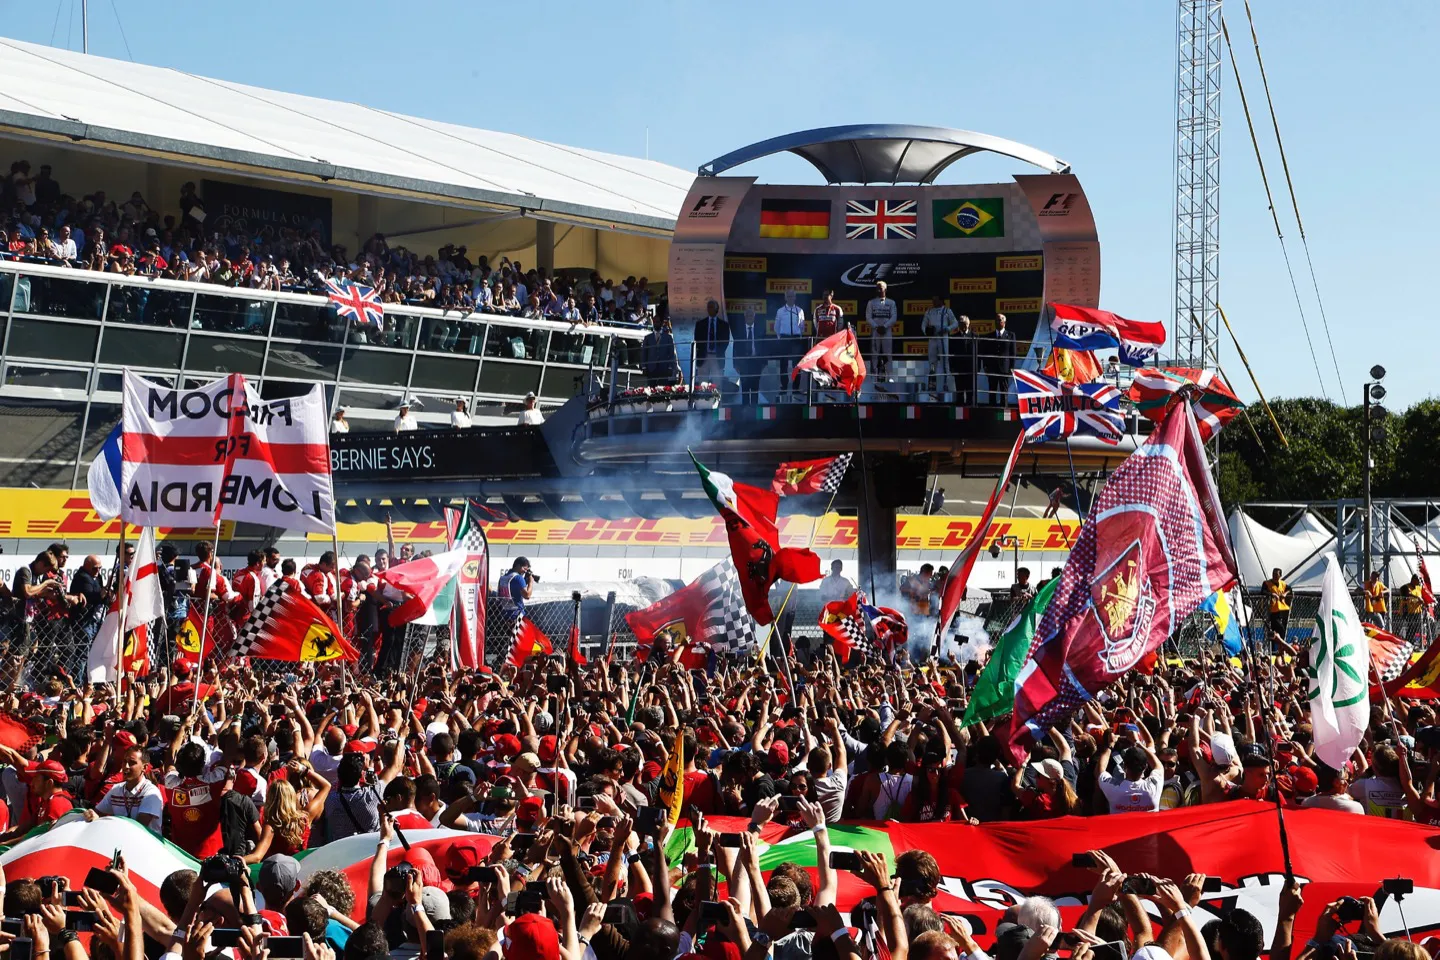 See the podium and race winner from the comfort of Paddock Club hospitality at Monza F1